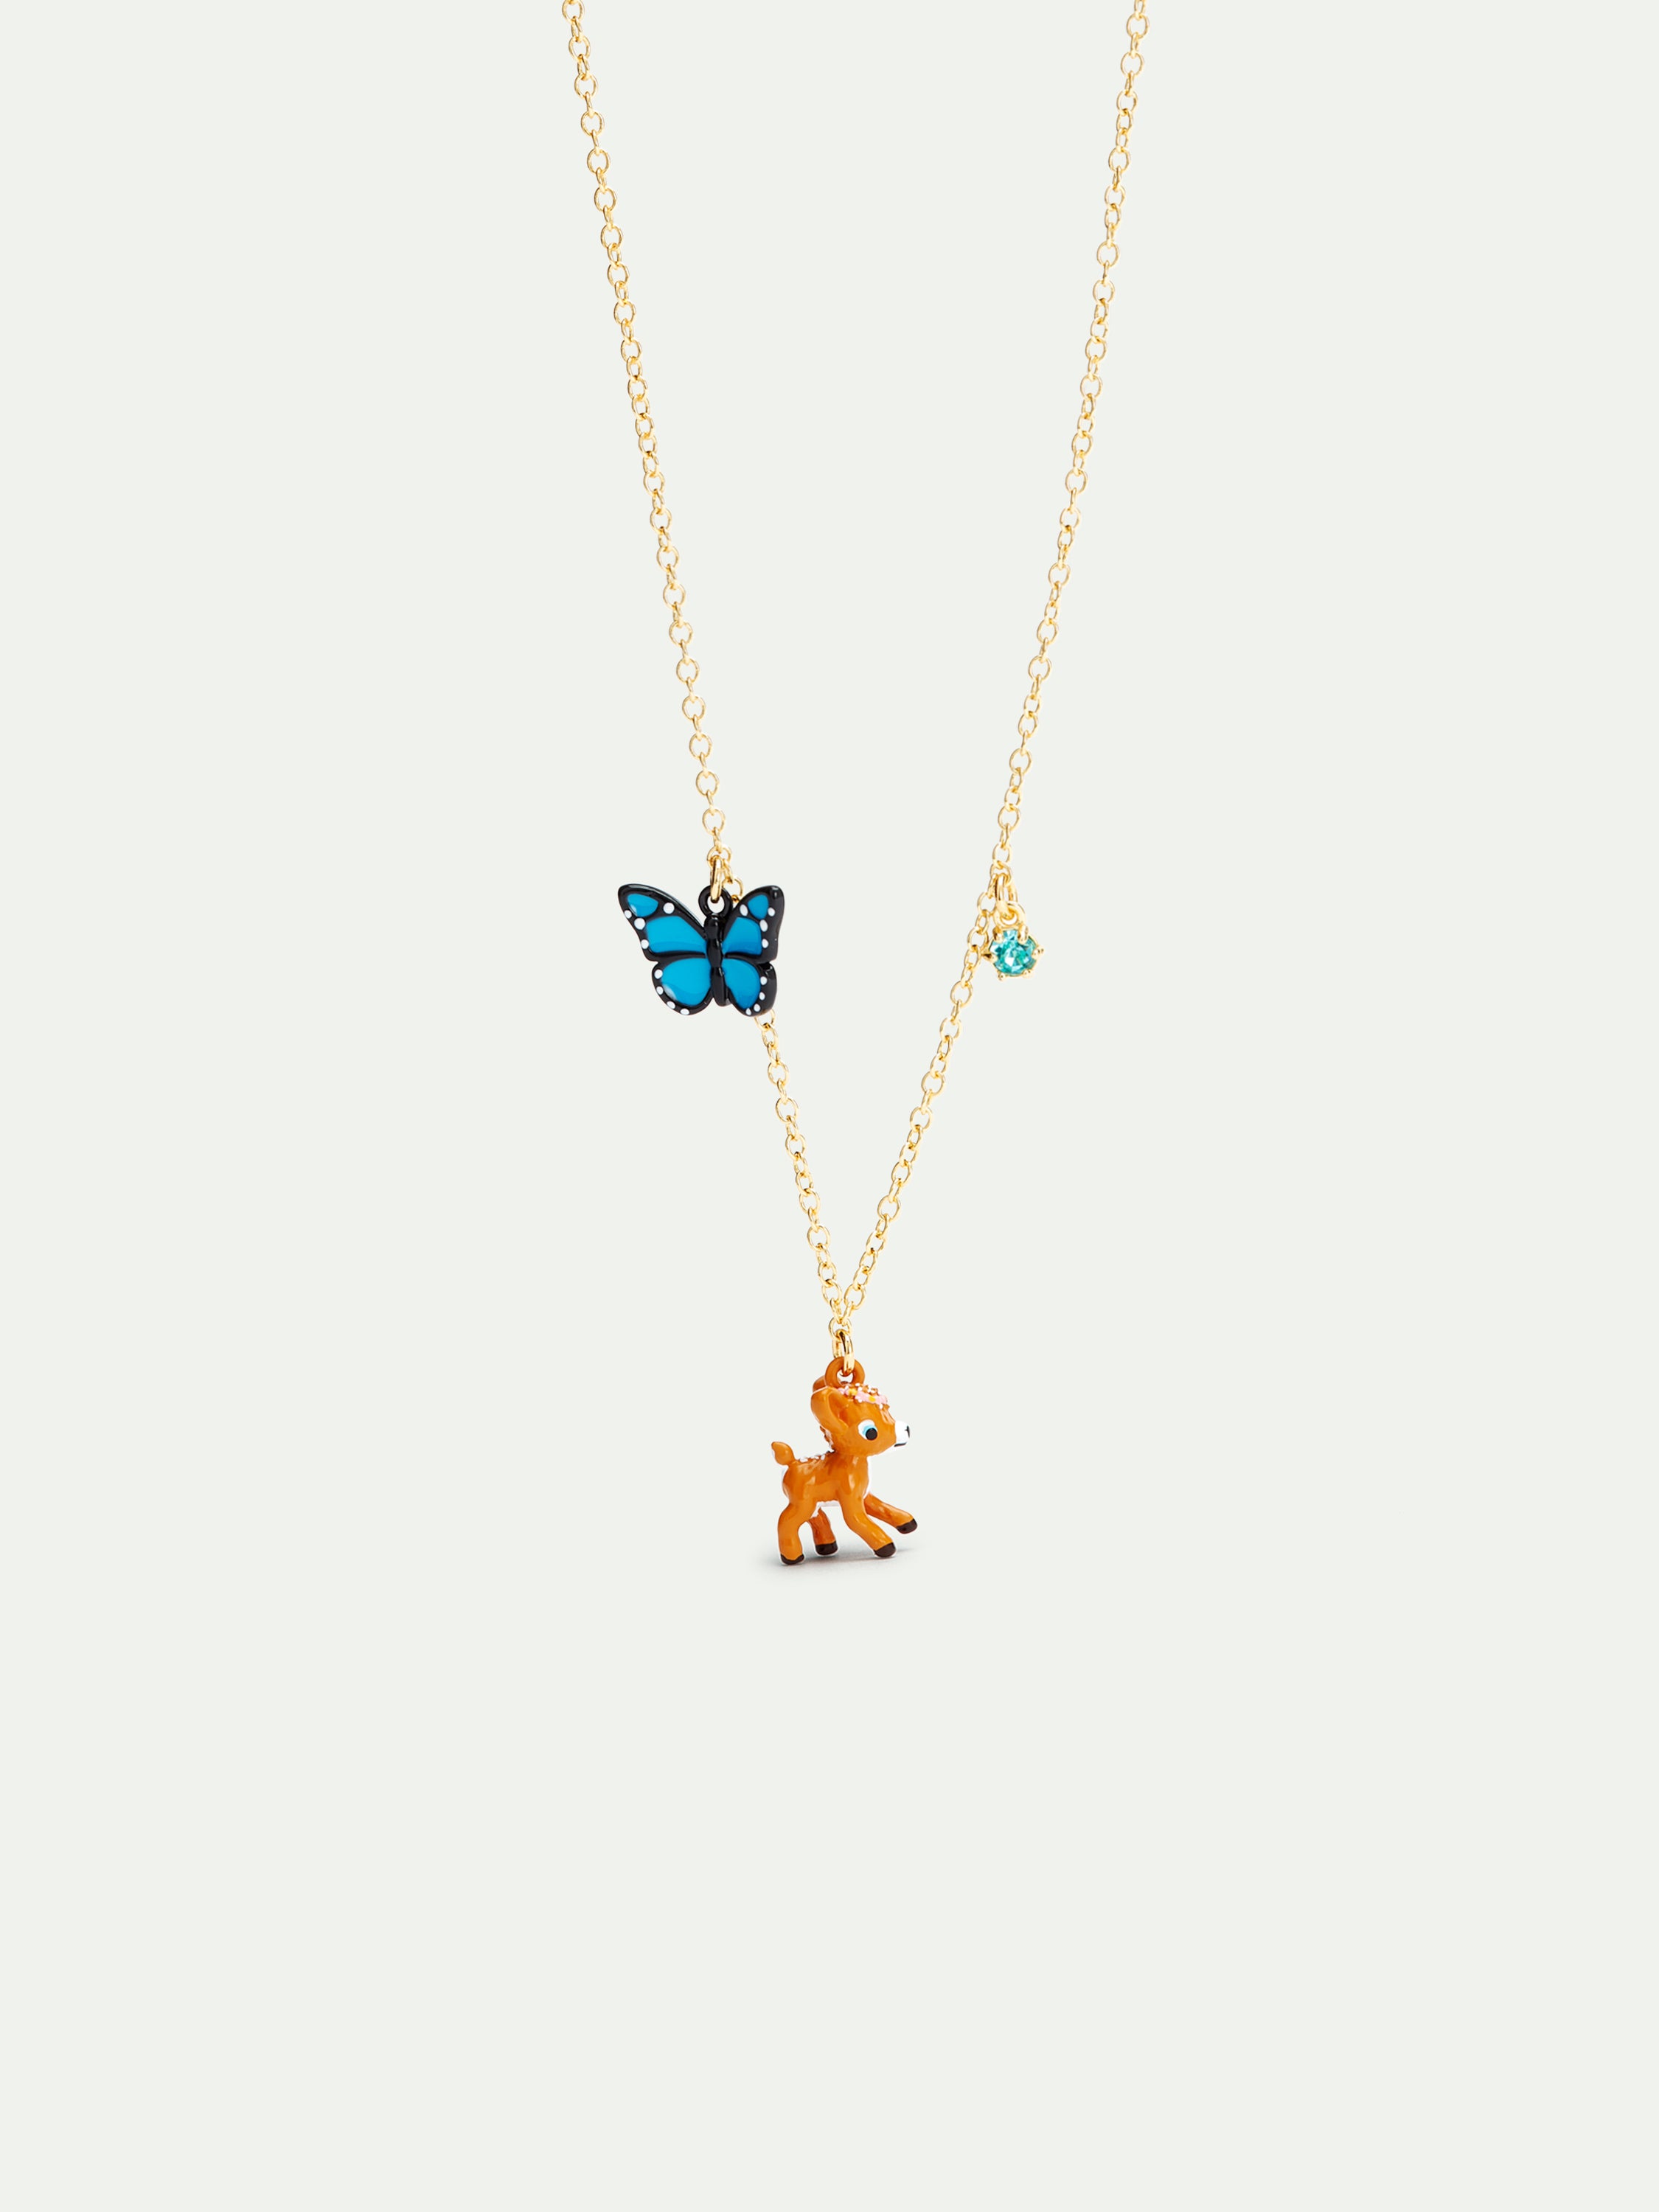 Fawn and midnight blue butterfly pendant necklace